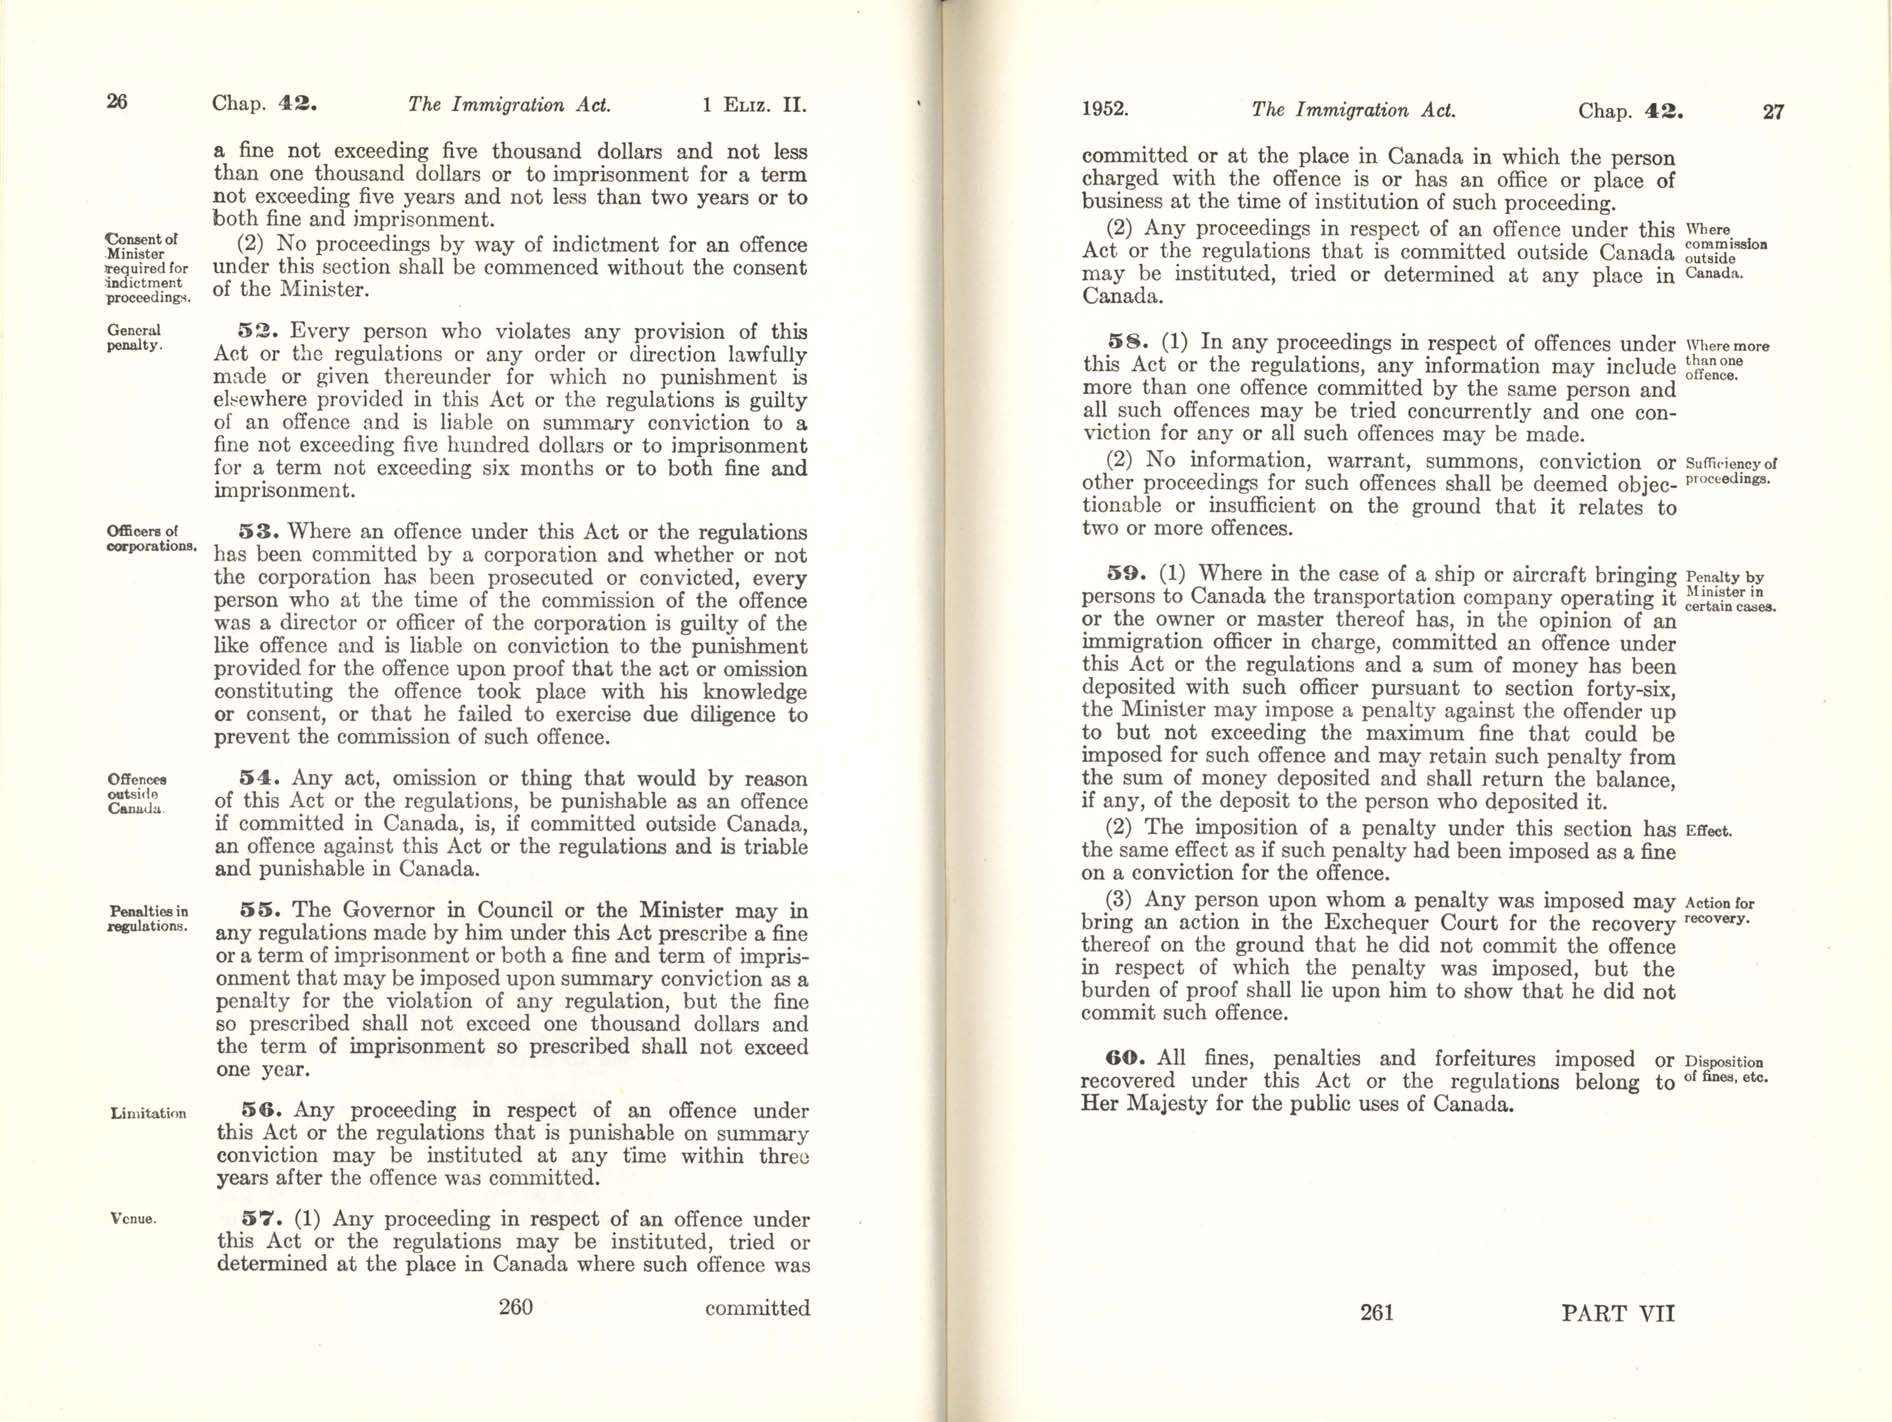 CHAP 42 Page 260, 261 Immigration Act, 1952